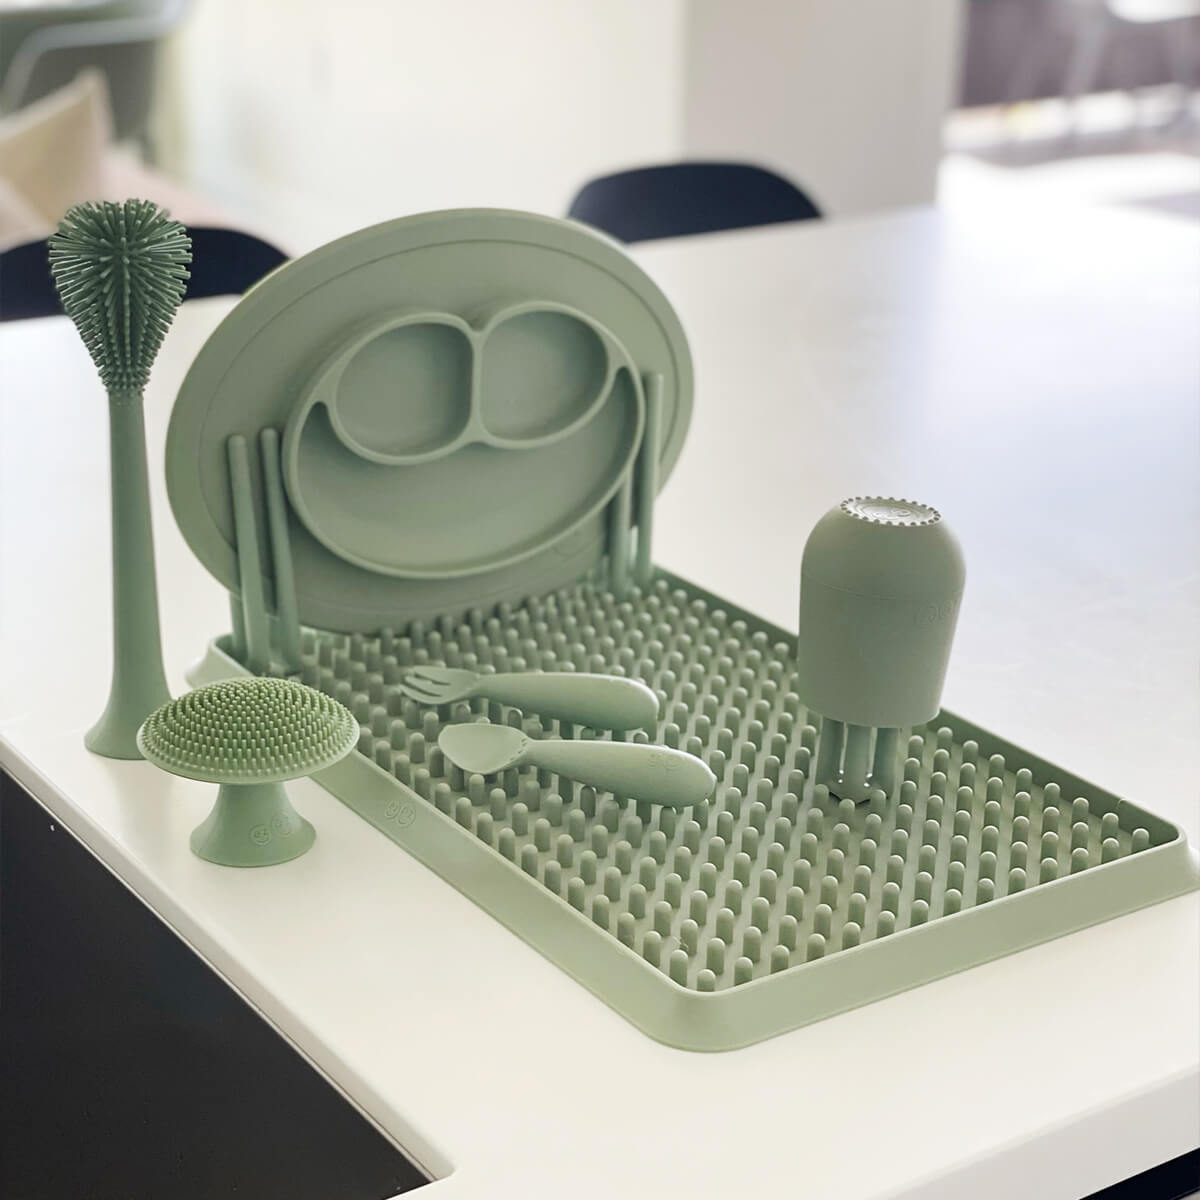 Cleaning Bundle in Sage by ezpz | Silicone Sponge, Bottle Brush & Drying Rack